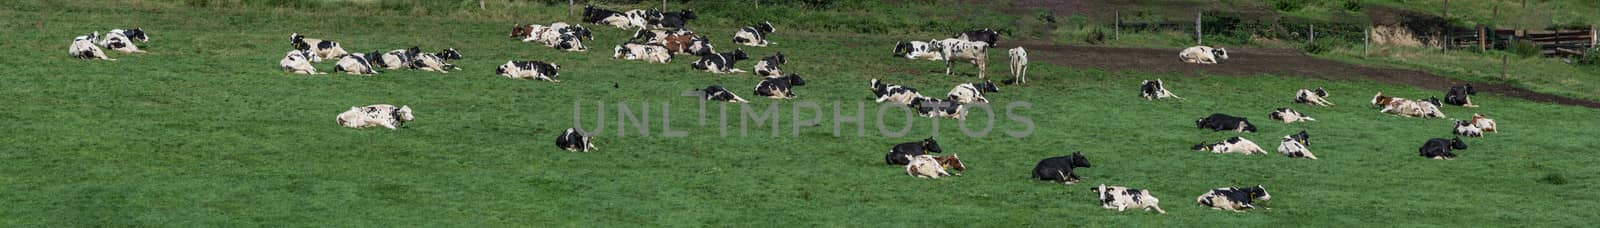 Cows on pasture  by JFsPic